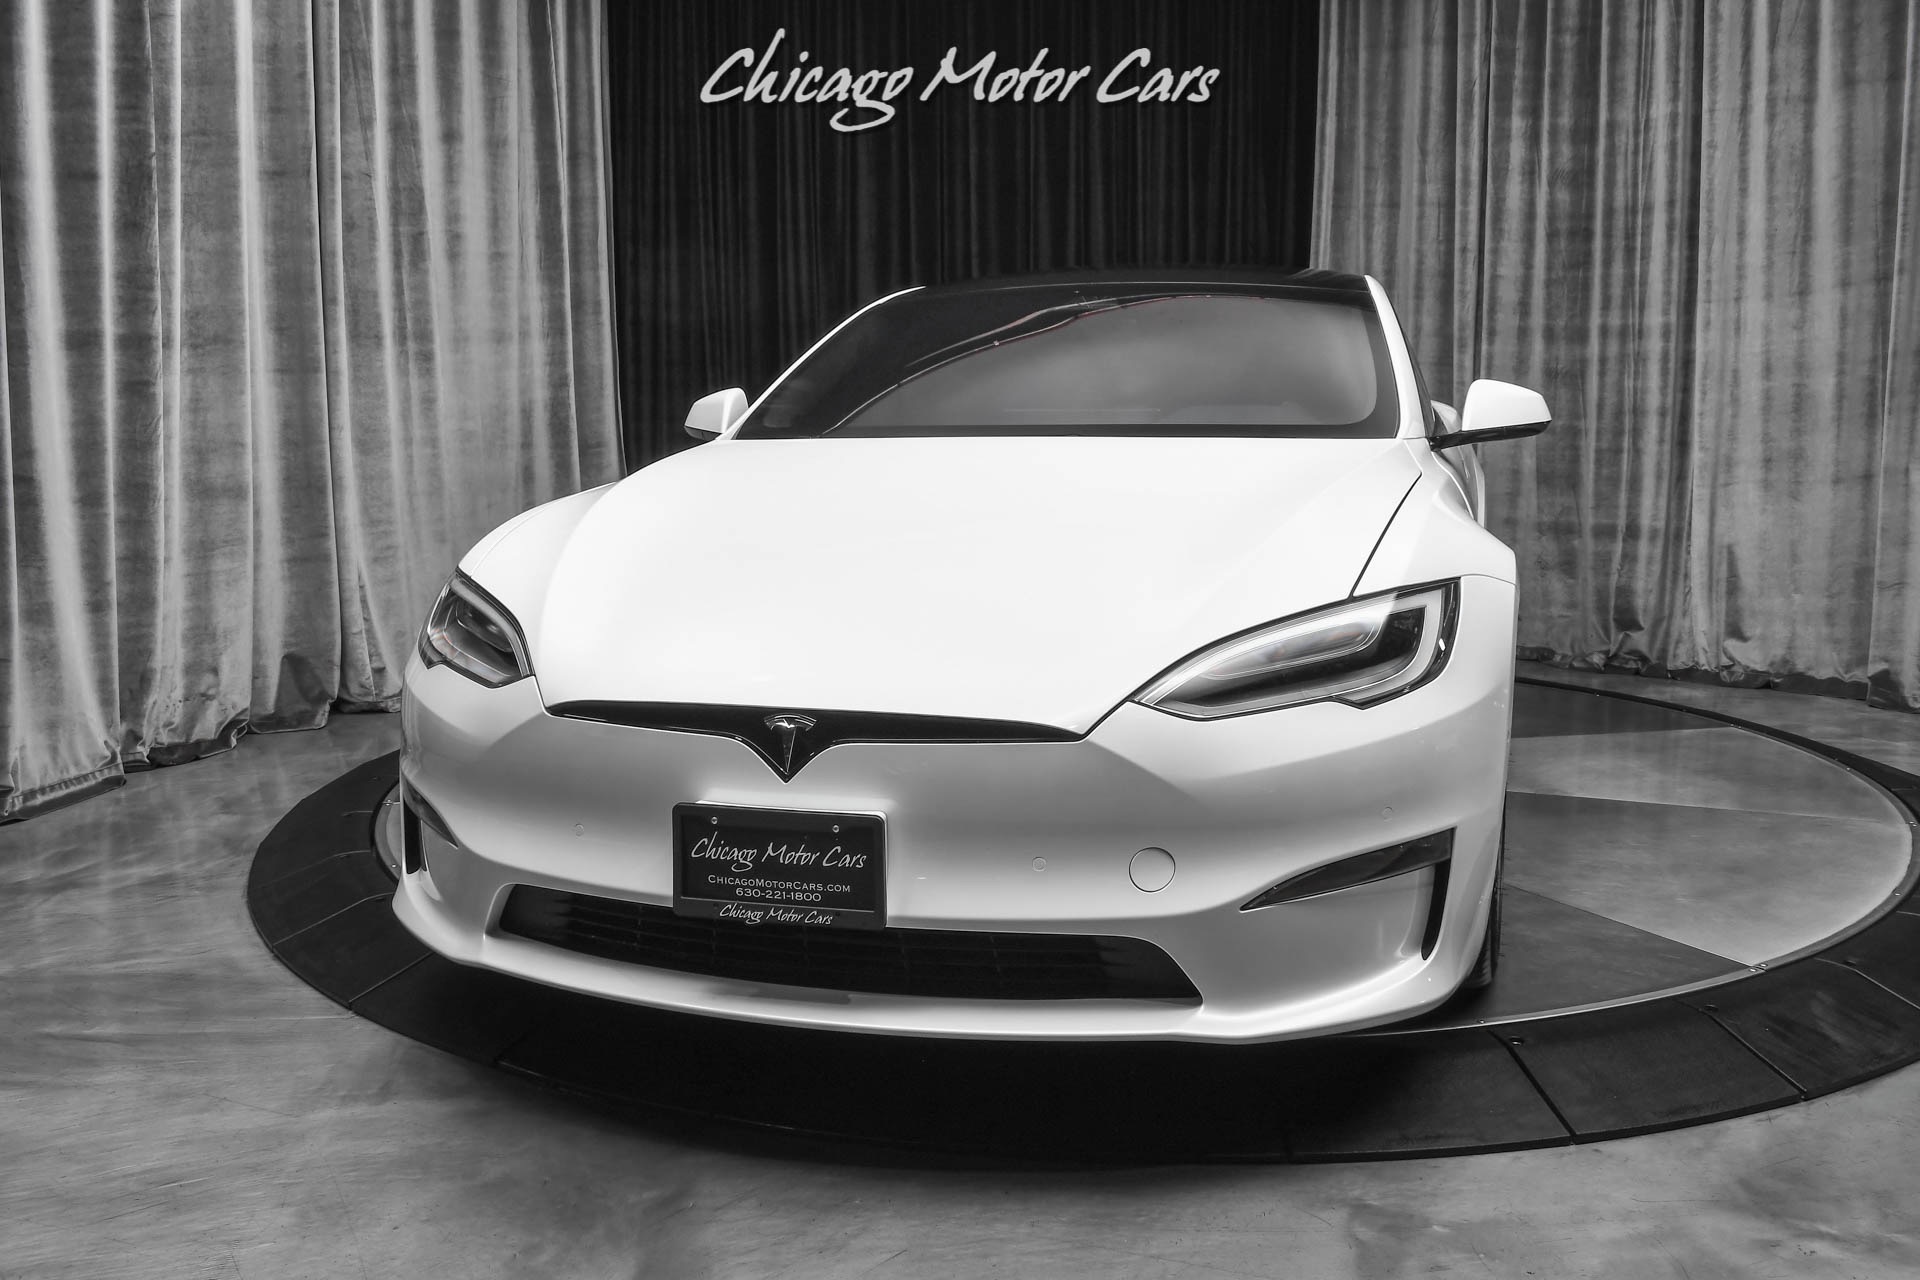 Used 2021 Tesla Model S Plaid Sedan Pearl White Full Self-Driving! 0-60 in  1.99 sec! Every Option! For Sale (Special Pricing)